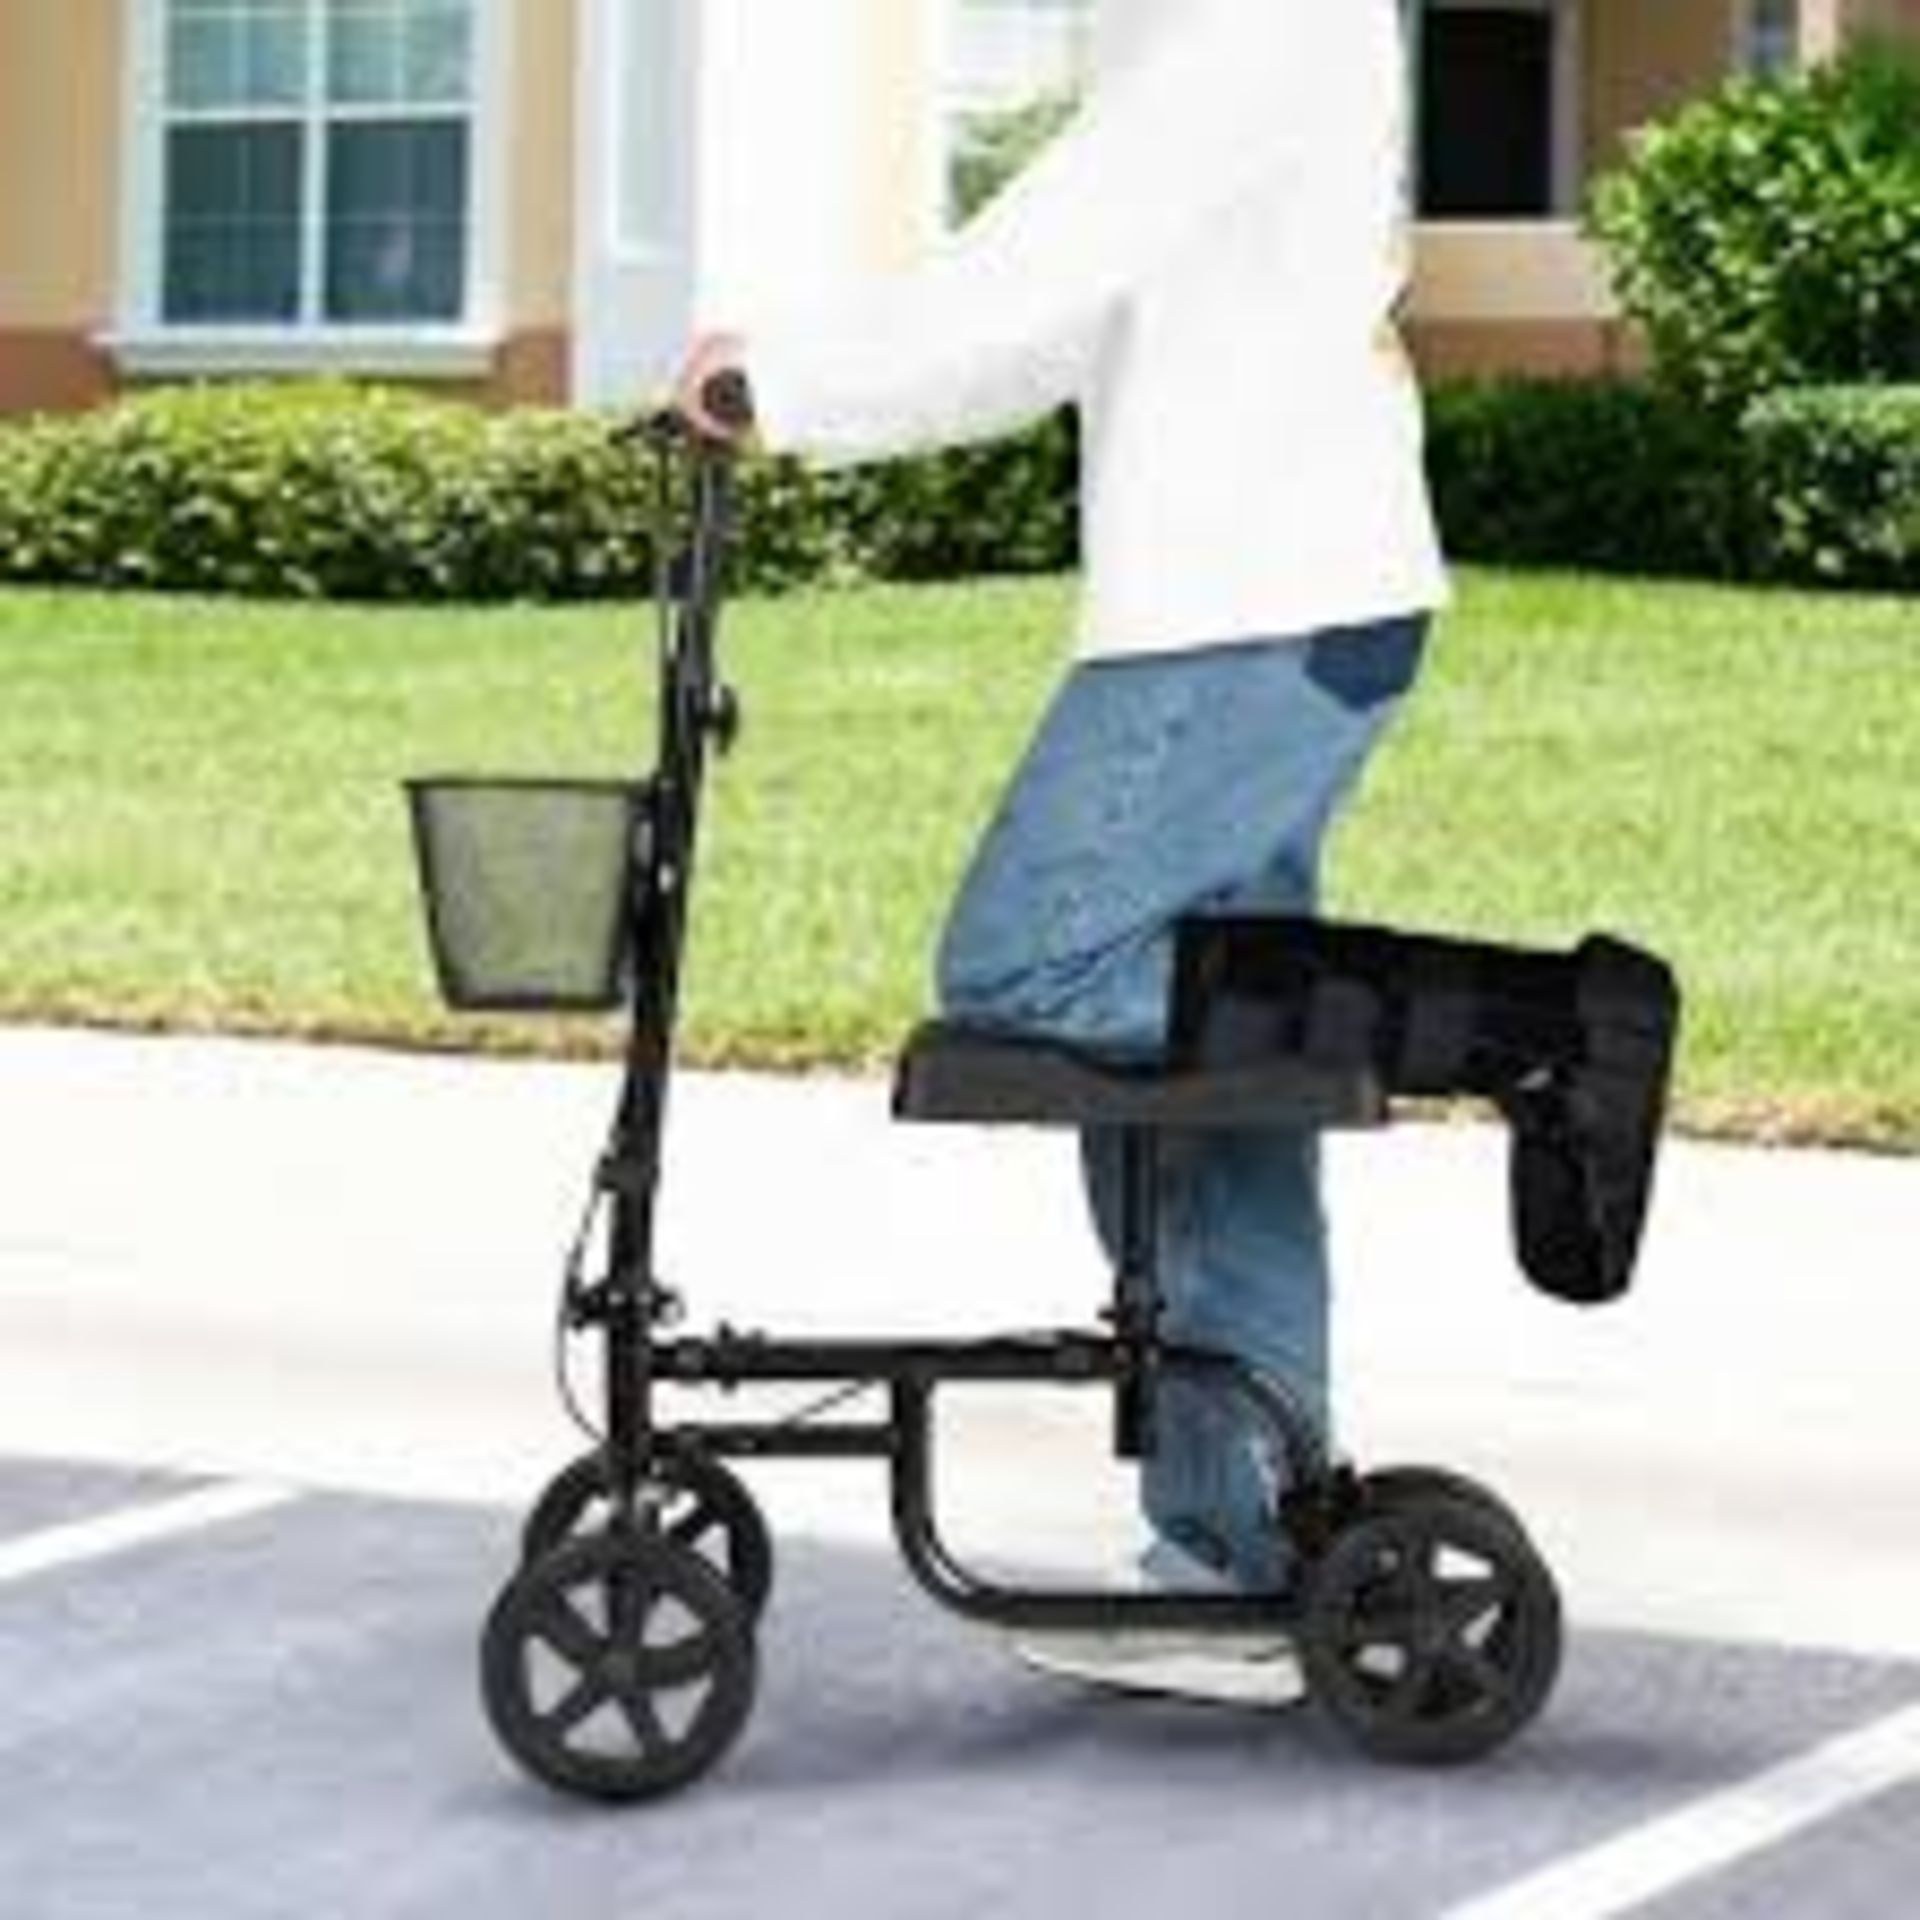 Foldable Knee Walker W/ Basket and Dual Brakes. - R13a.11.